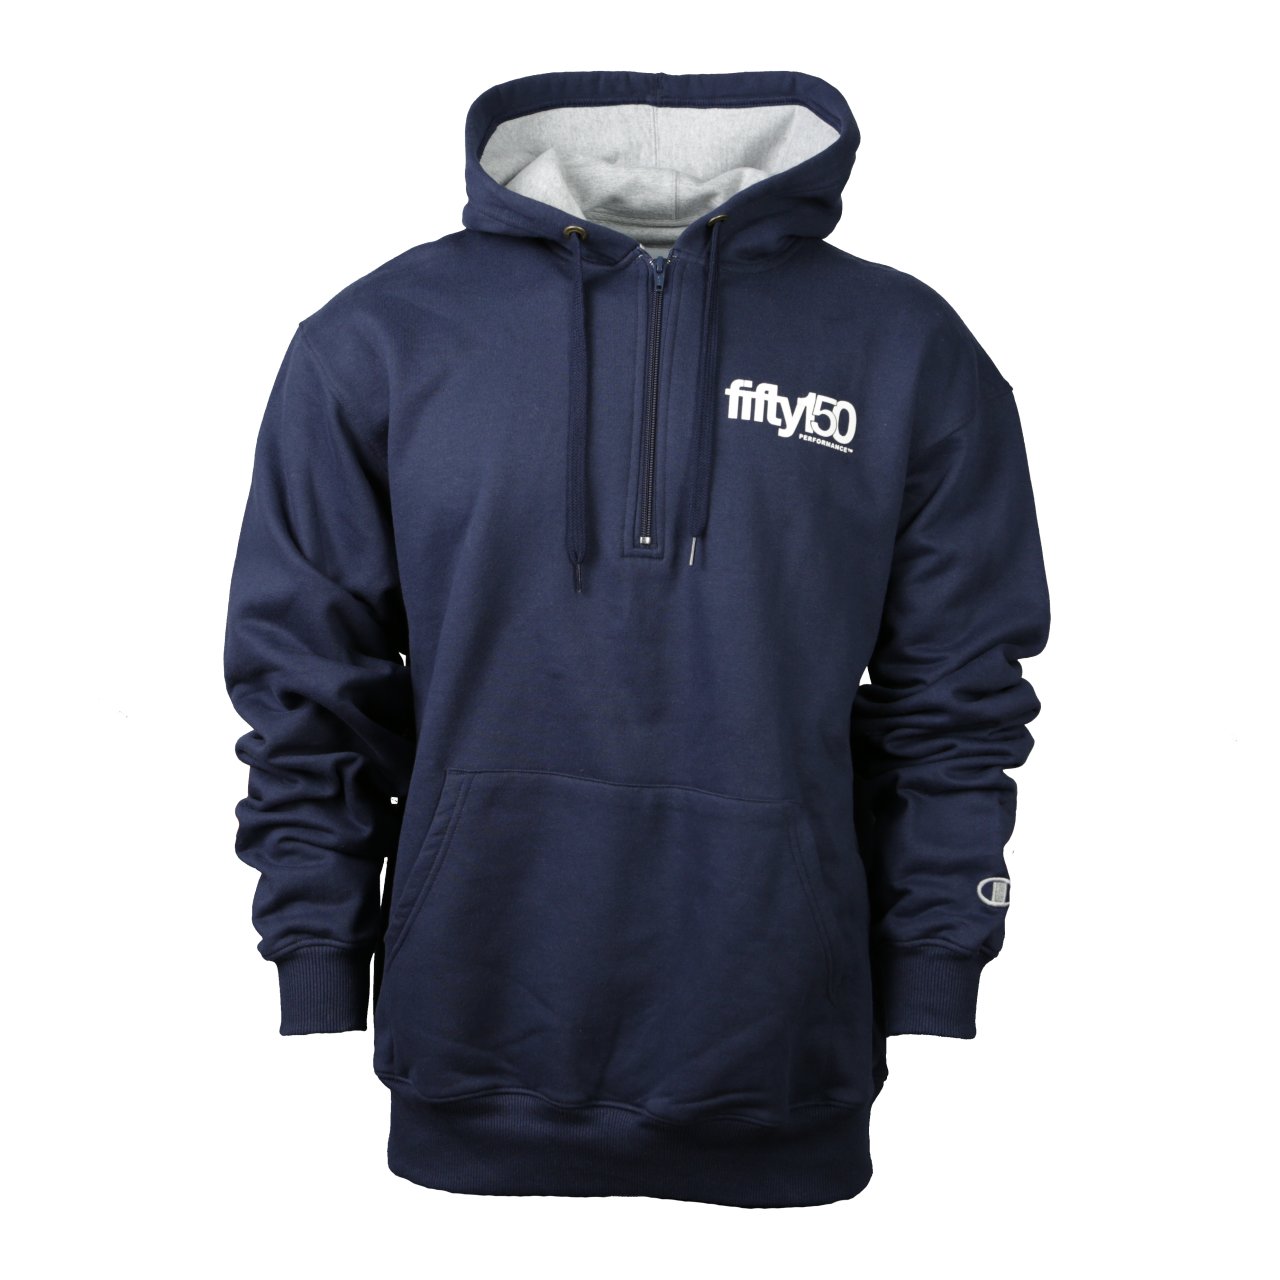 Navy Quarter Zip Champion Hoodie (Small - Fifty150 Brand | Chasing Dreams